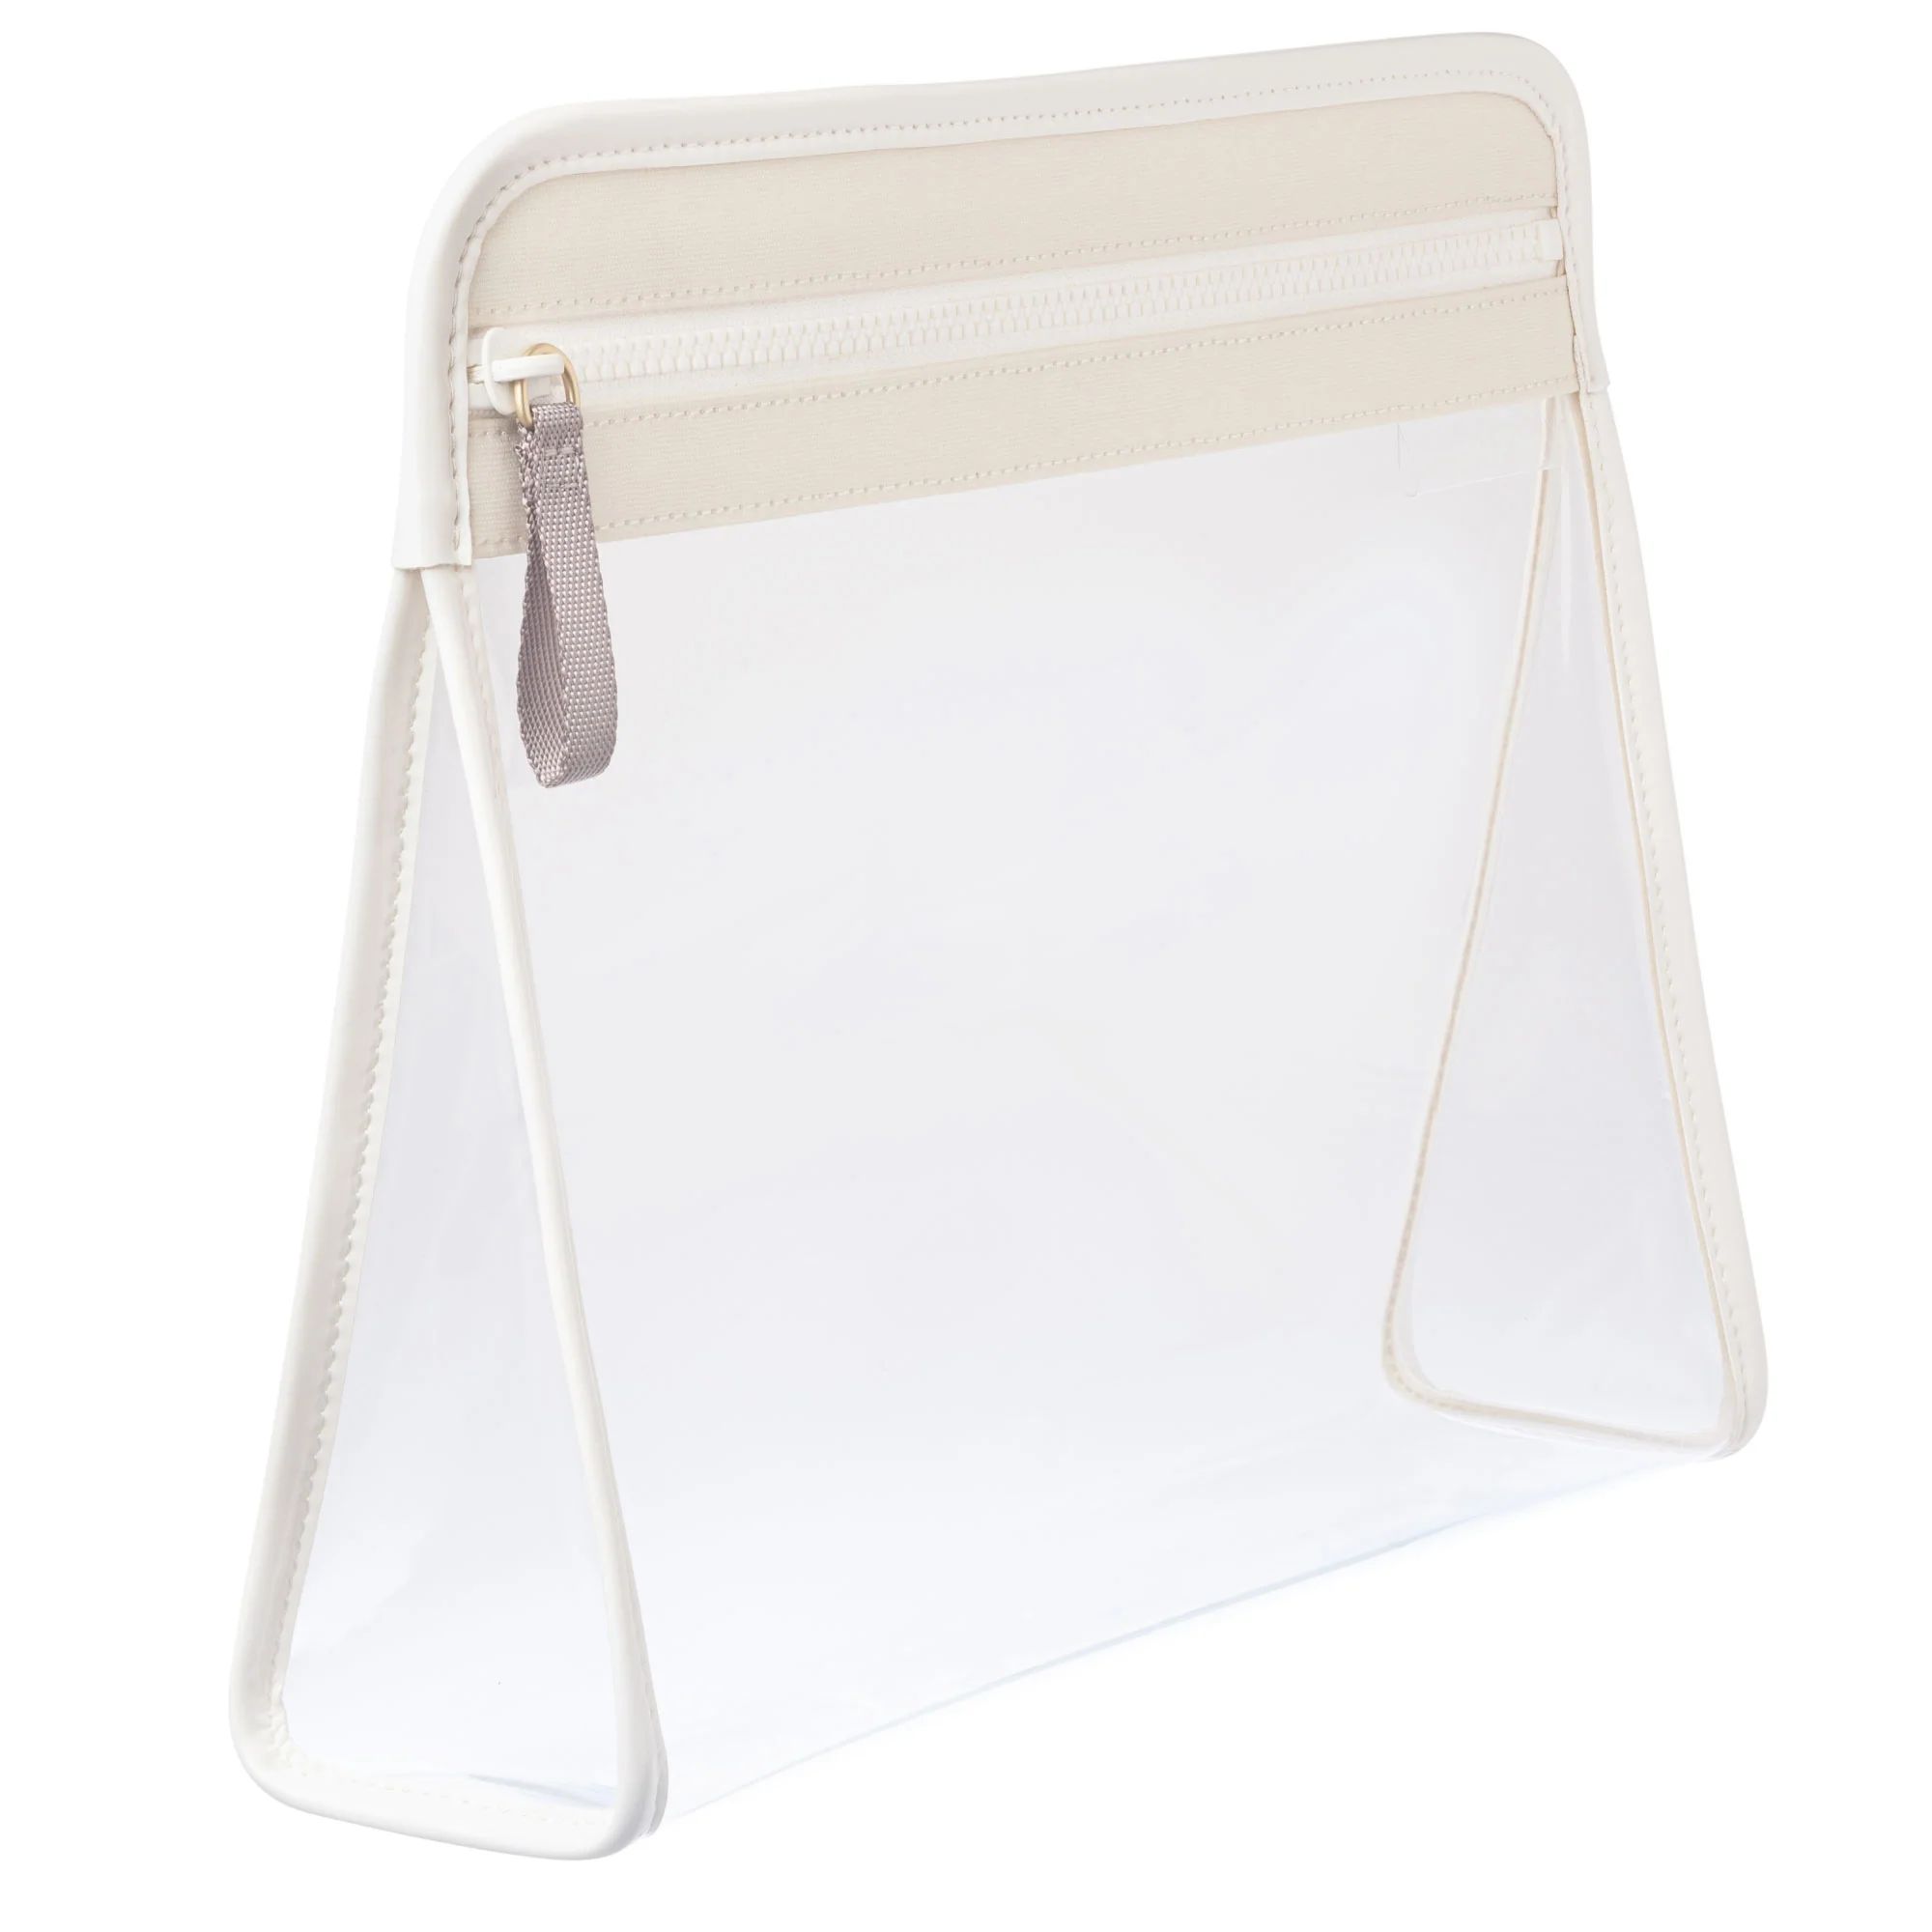 Clarity Pouch Large - Large Clear Travel Pouch | Truffle | TRUFFLE